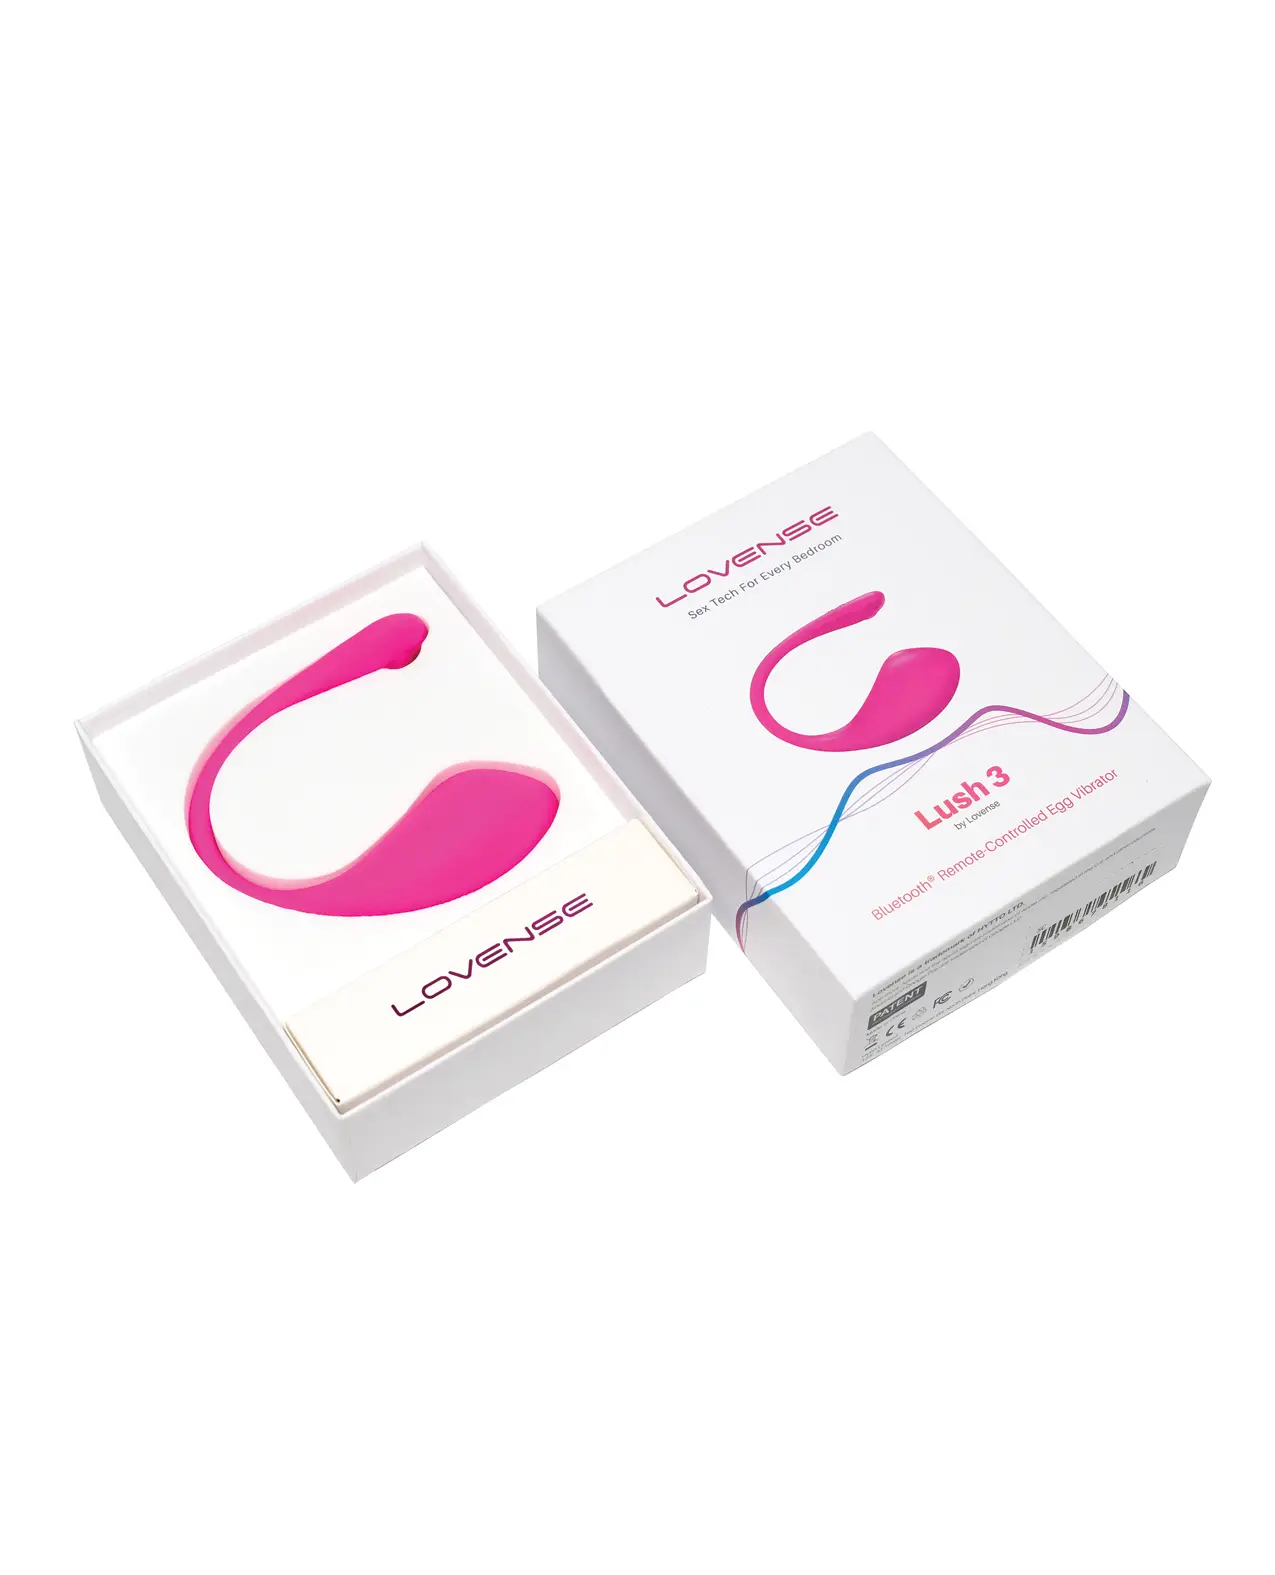 Lovense Lush 3.0 Sound Activated Camming Vibrator – Pink